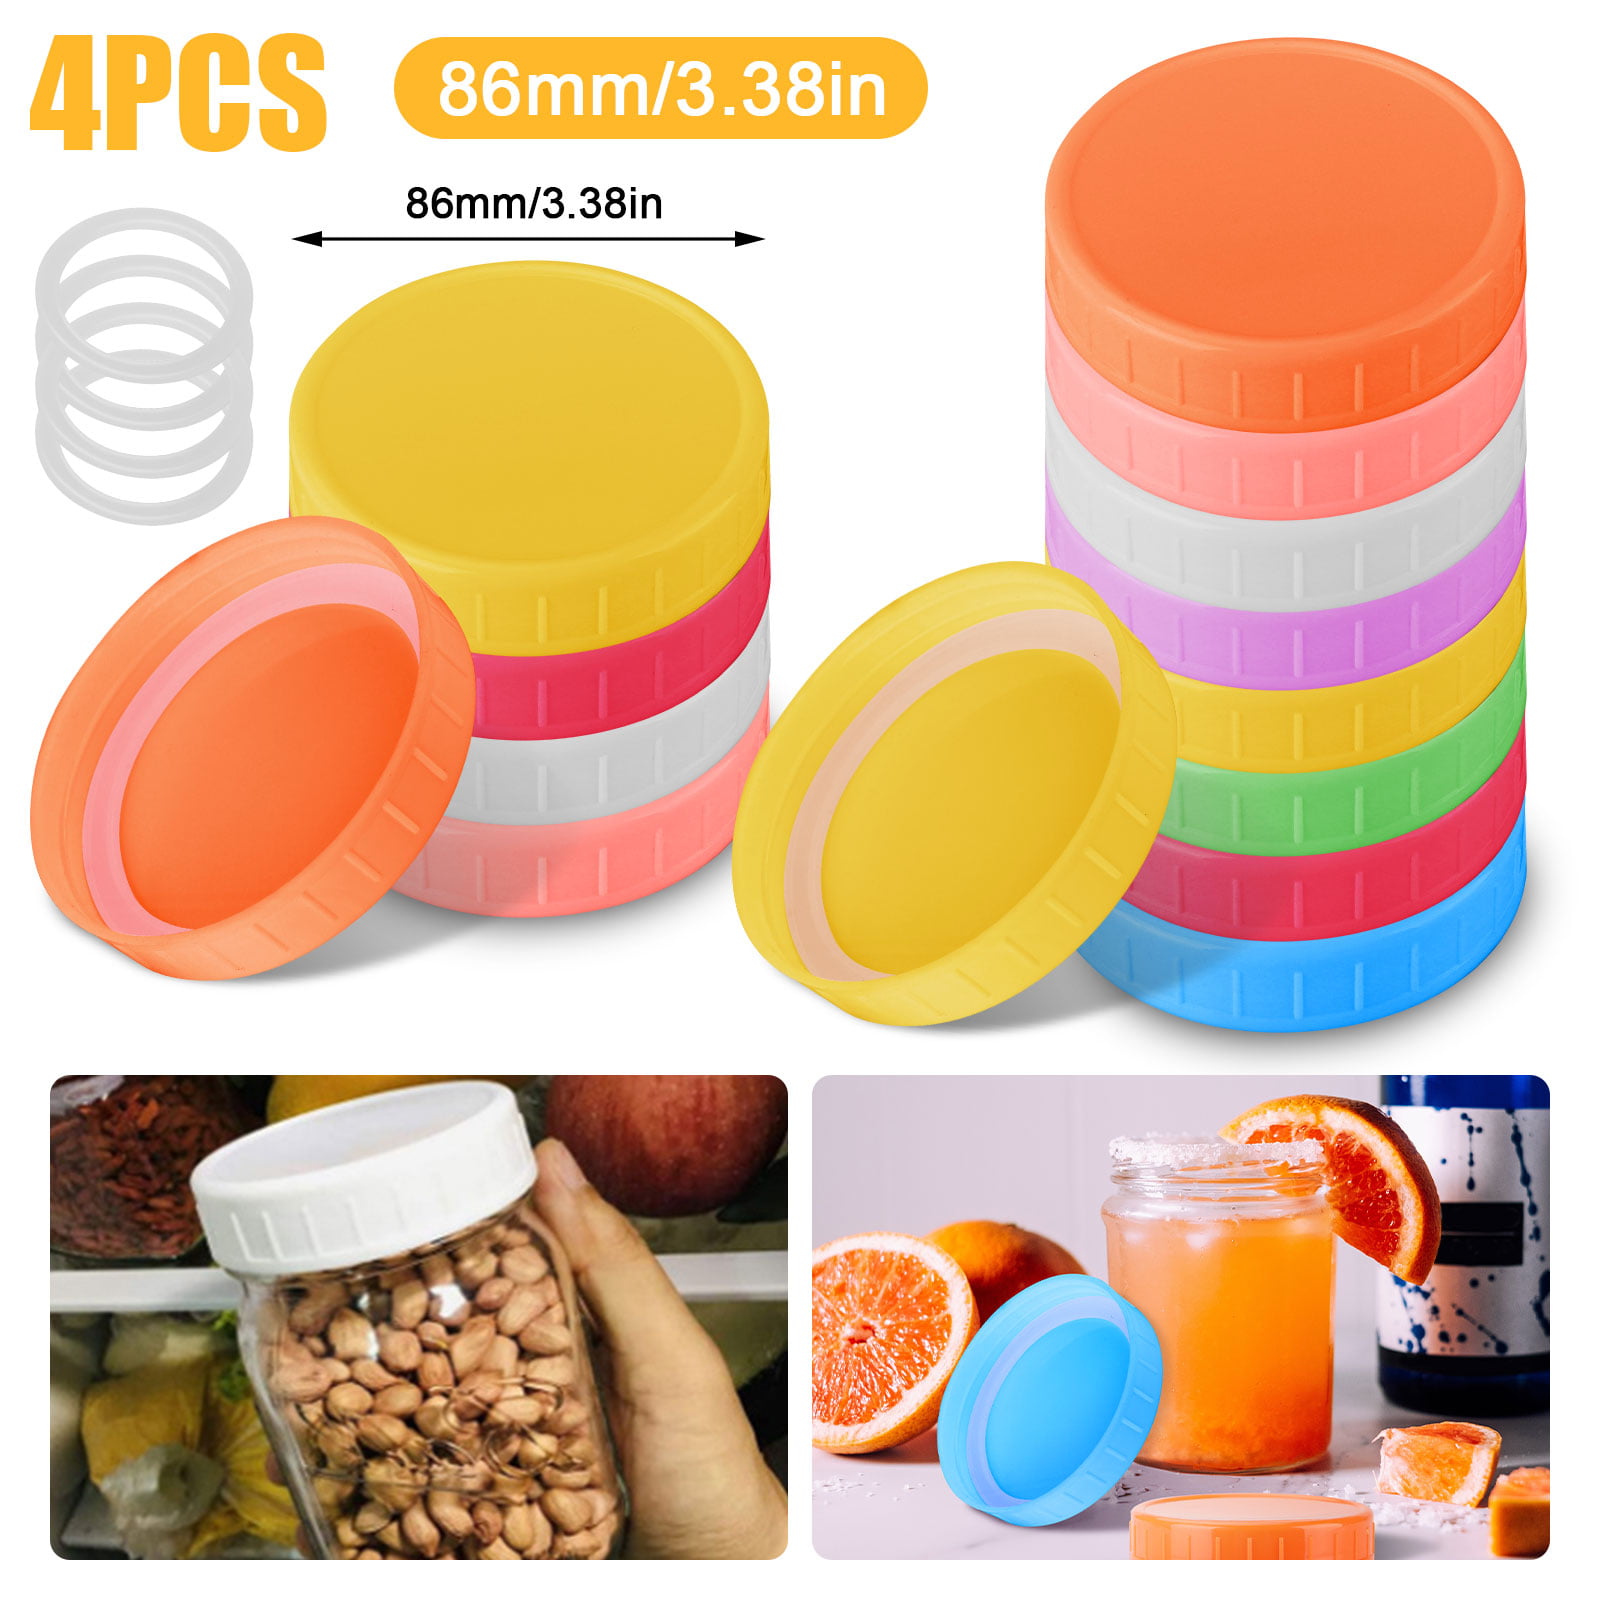 Leak-Proof & Anti-Scratch Resistant Surface 8 Colors 24 Pack Canning Lids Regular Mouth Plastic Mason Jar Lids with Silicone Seals Rings Fits Ball/Kerr Jars 